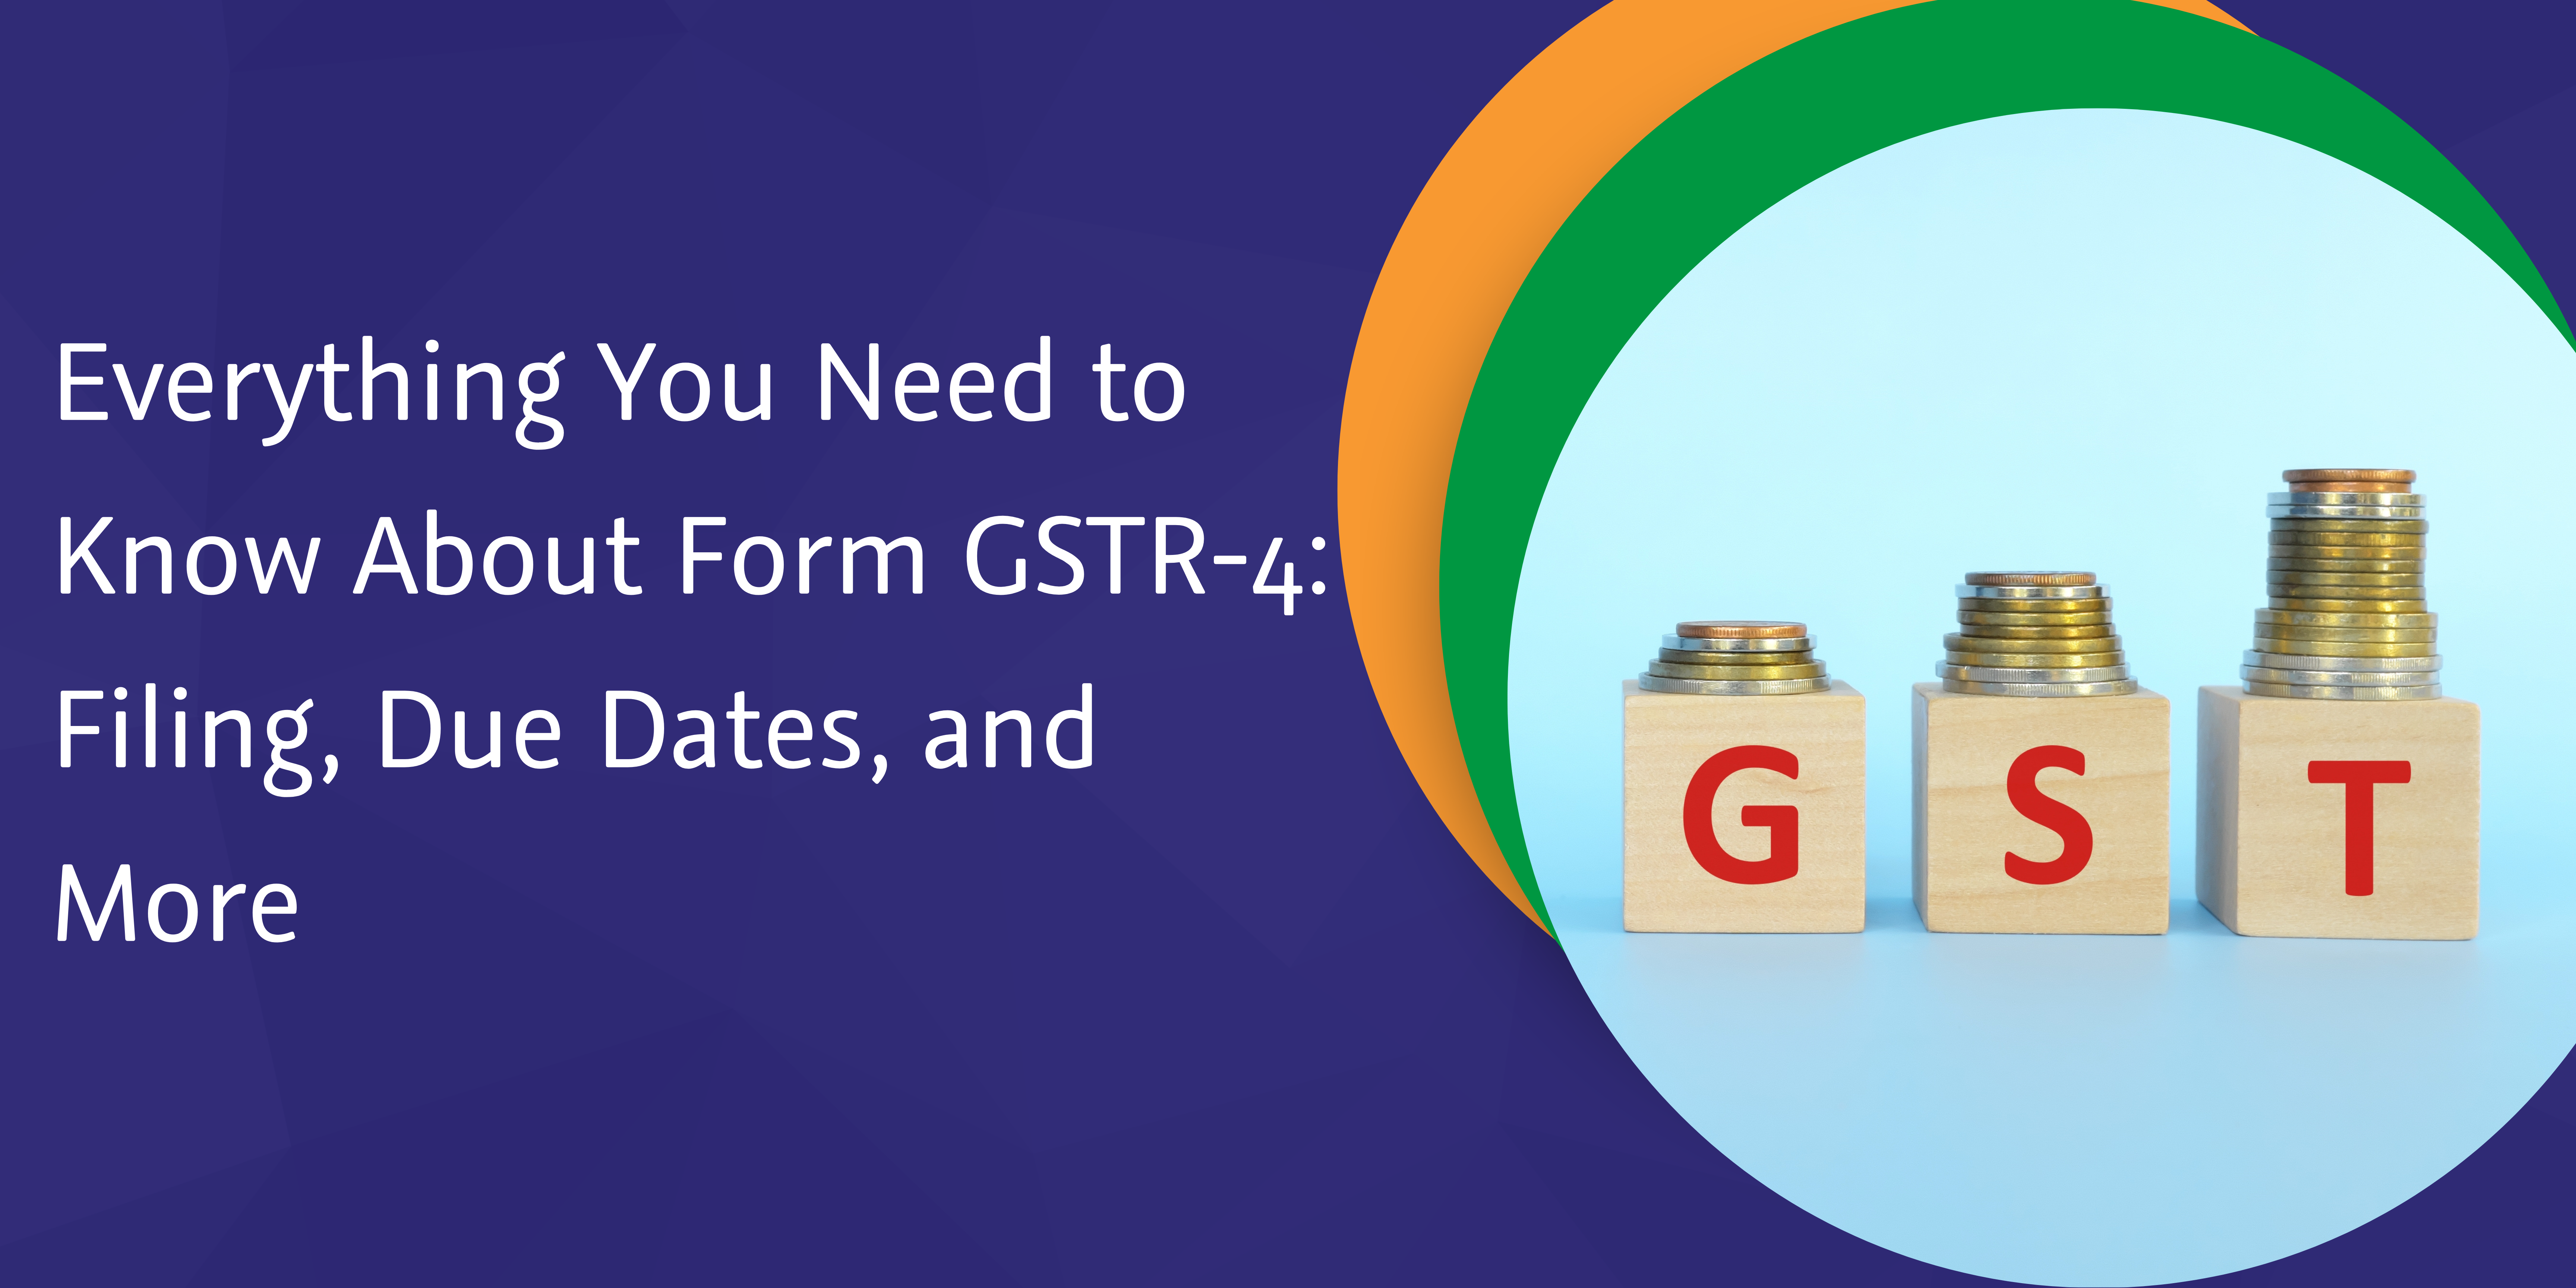 everything you need to know about form gstr-4